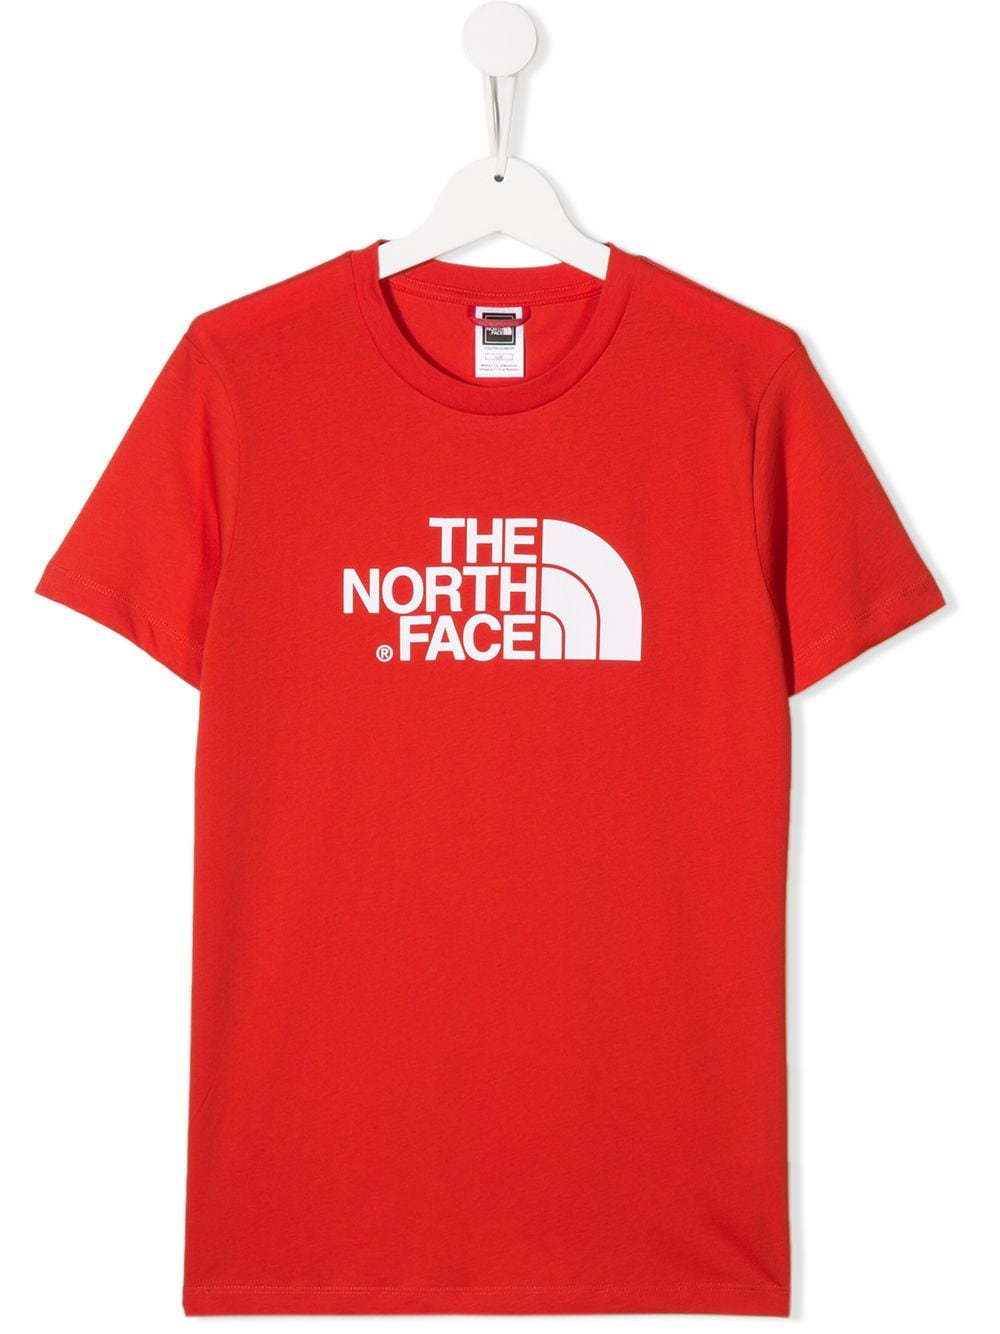 The North Face Teen Logo Print T-shirt In Red